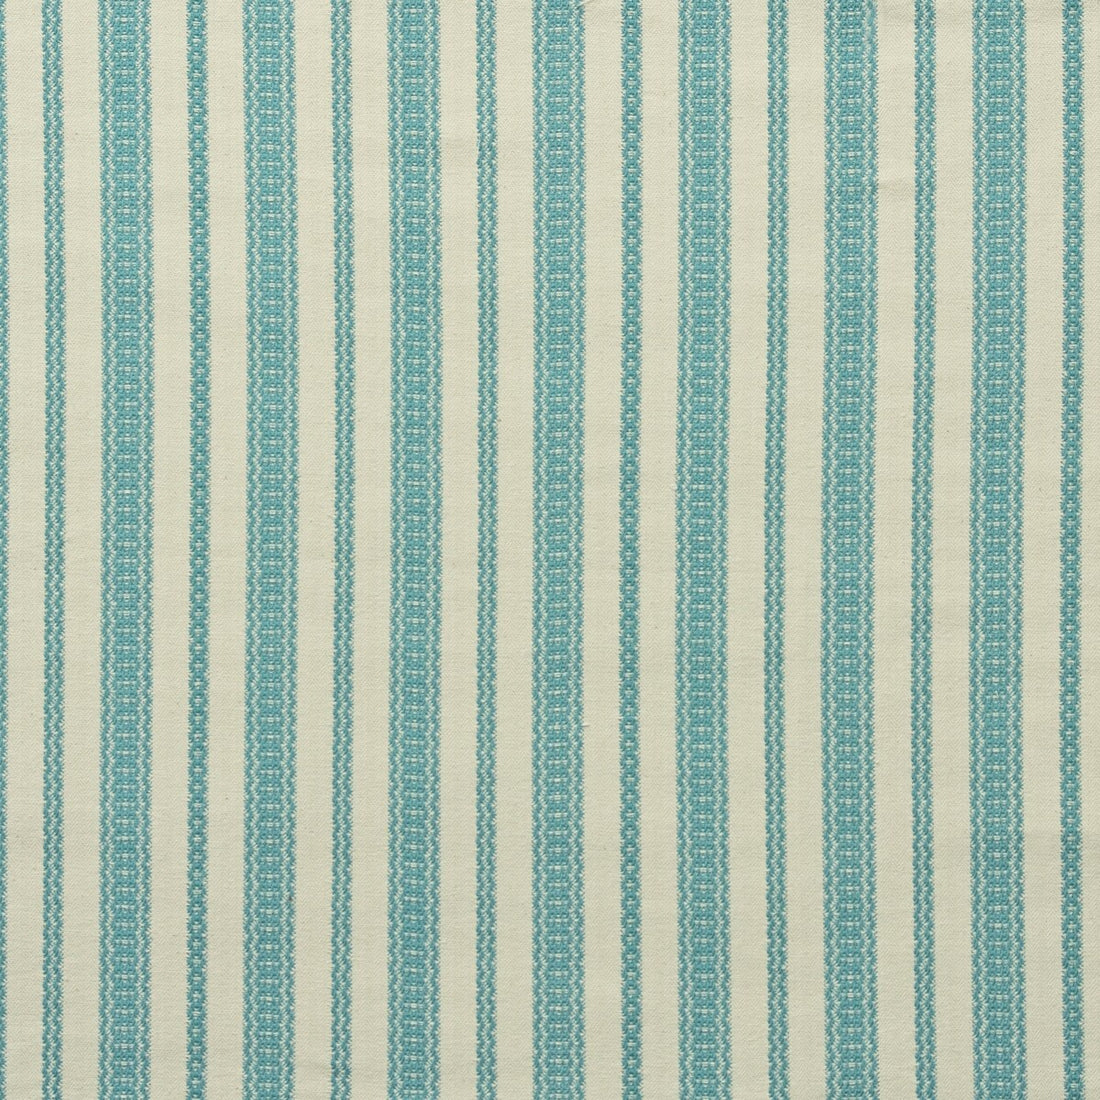 Payson fabric in turquoise color - pattern BFC-3676.13.0 - by Lee Jofa in the Blithfield collection